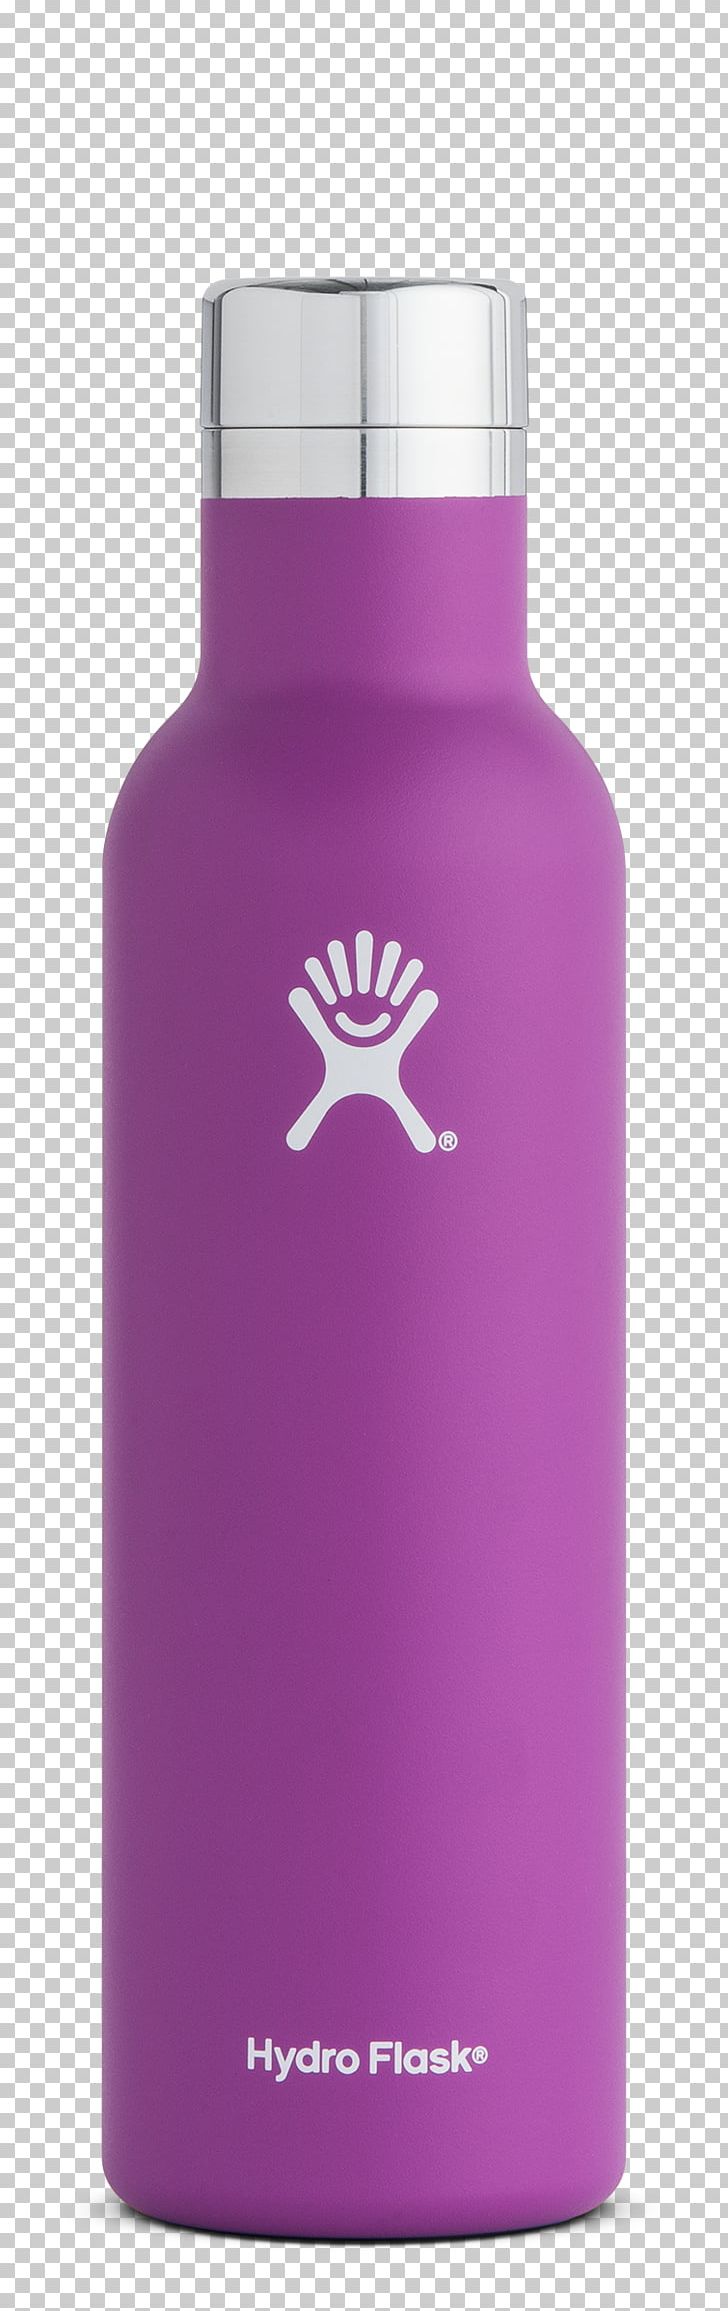 Wine Water Bottles Hydro Flask Liquid PNG, Clipart, Billion, Bottle, Cooler, Food Drinks, Hydro Flask Free PNG Download